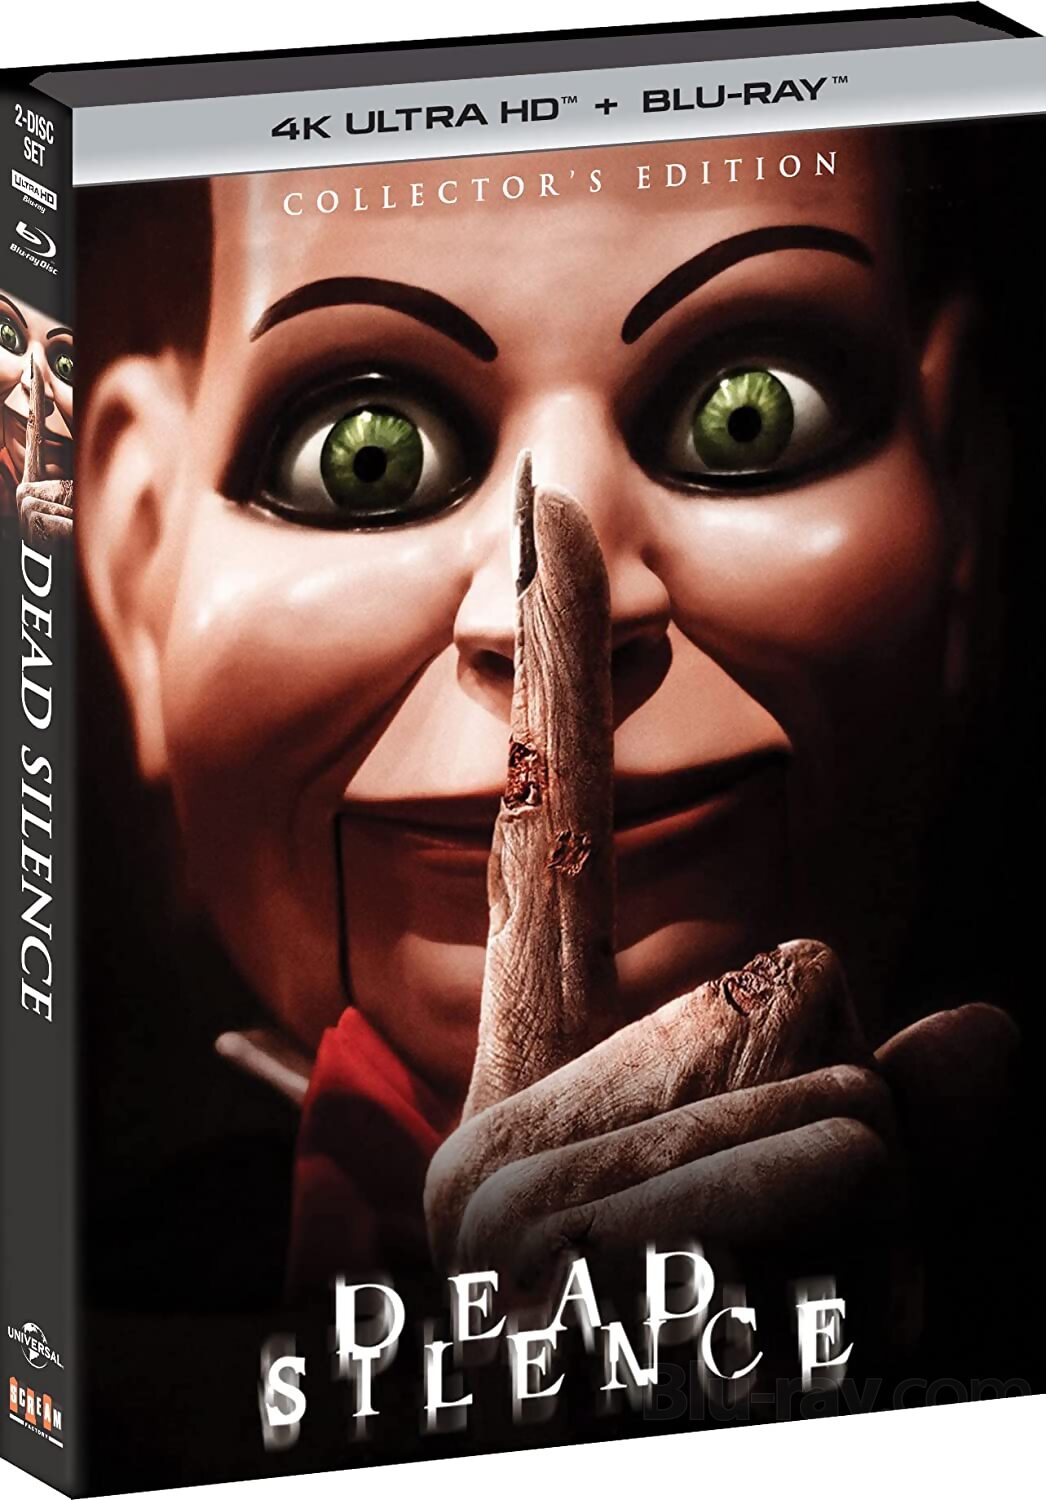 Scream Factory: Dead Silence 4K Blu-ray Collector's Edition Detailed